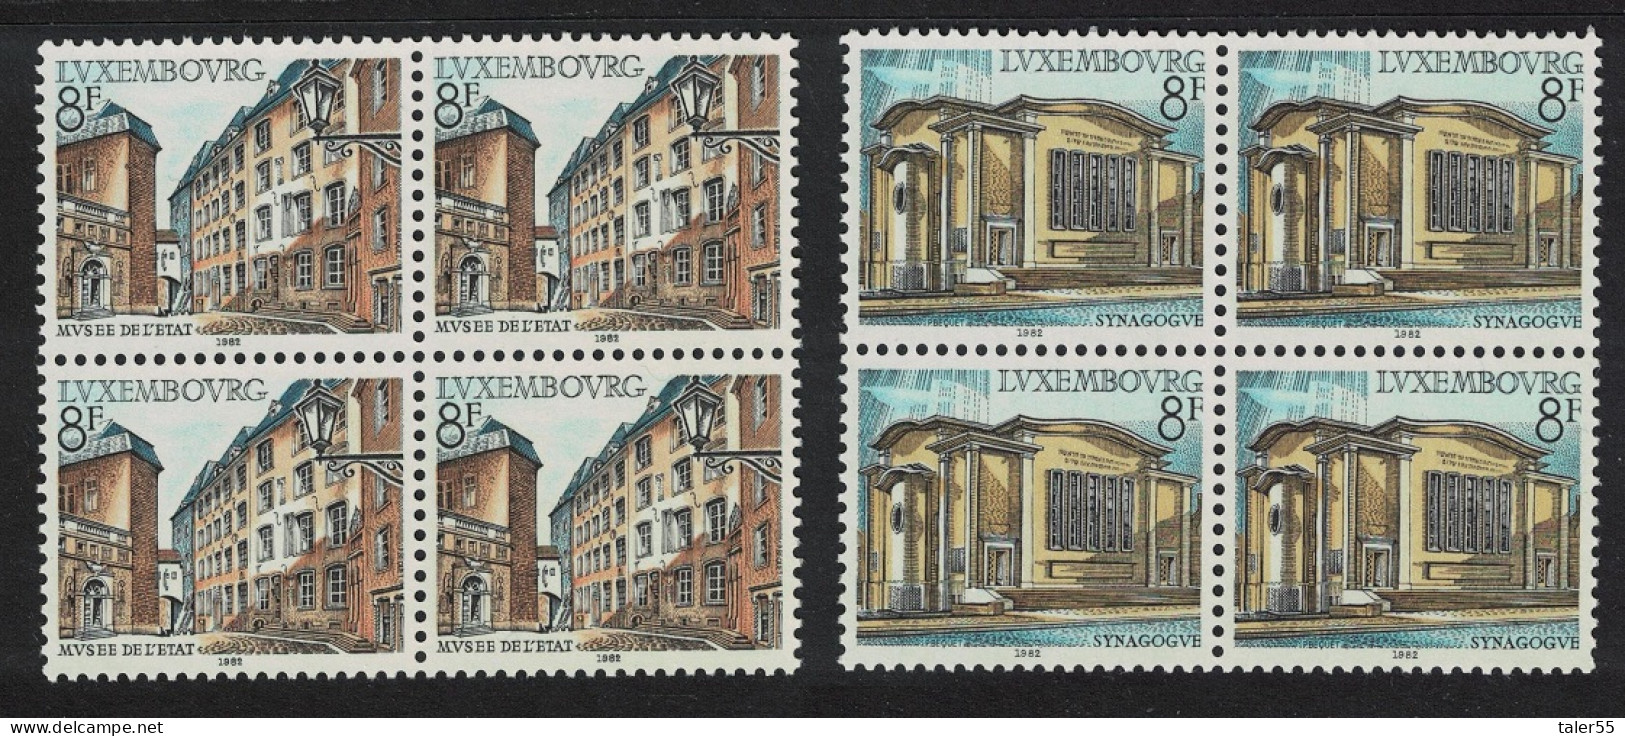 Luxembourg Synagogue State Museum 2v Blocks Of 4 1982 MNH SG#1090-1091 - Nuevos